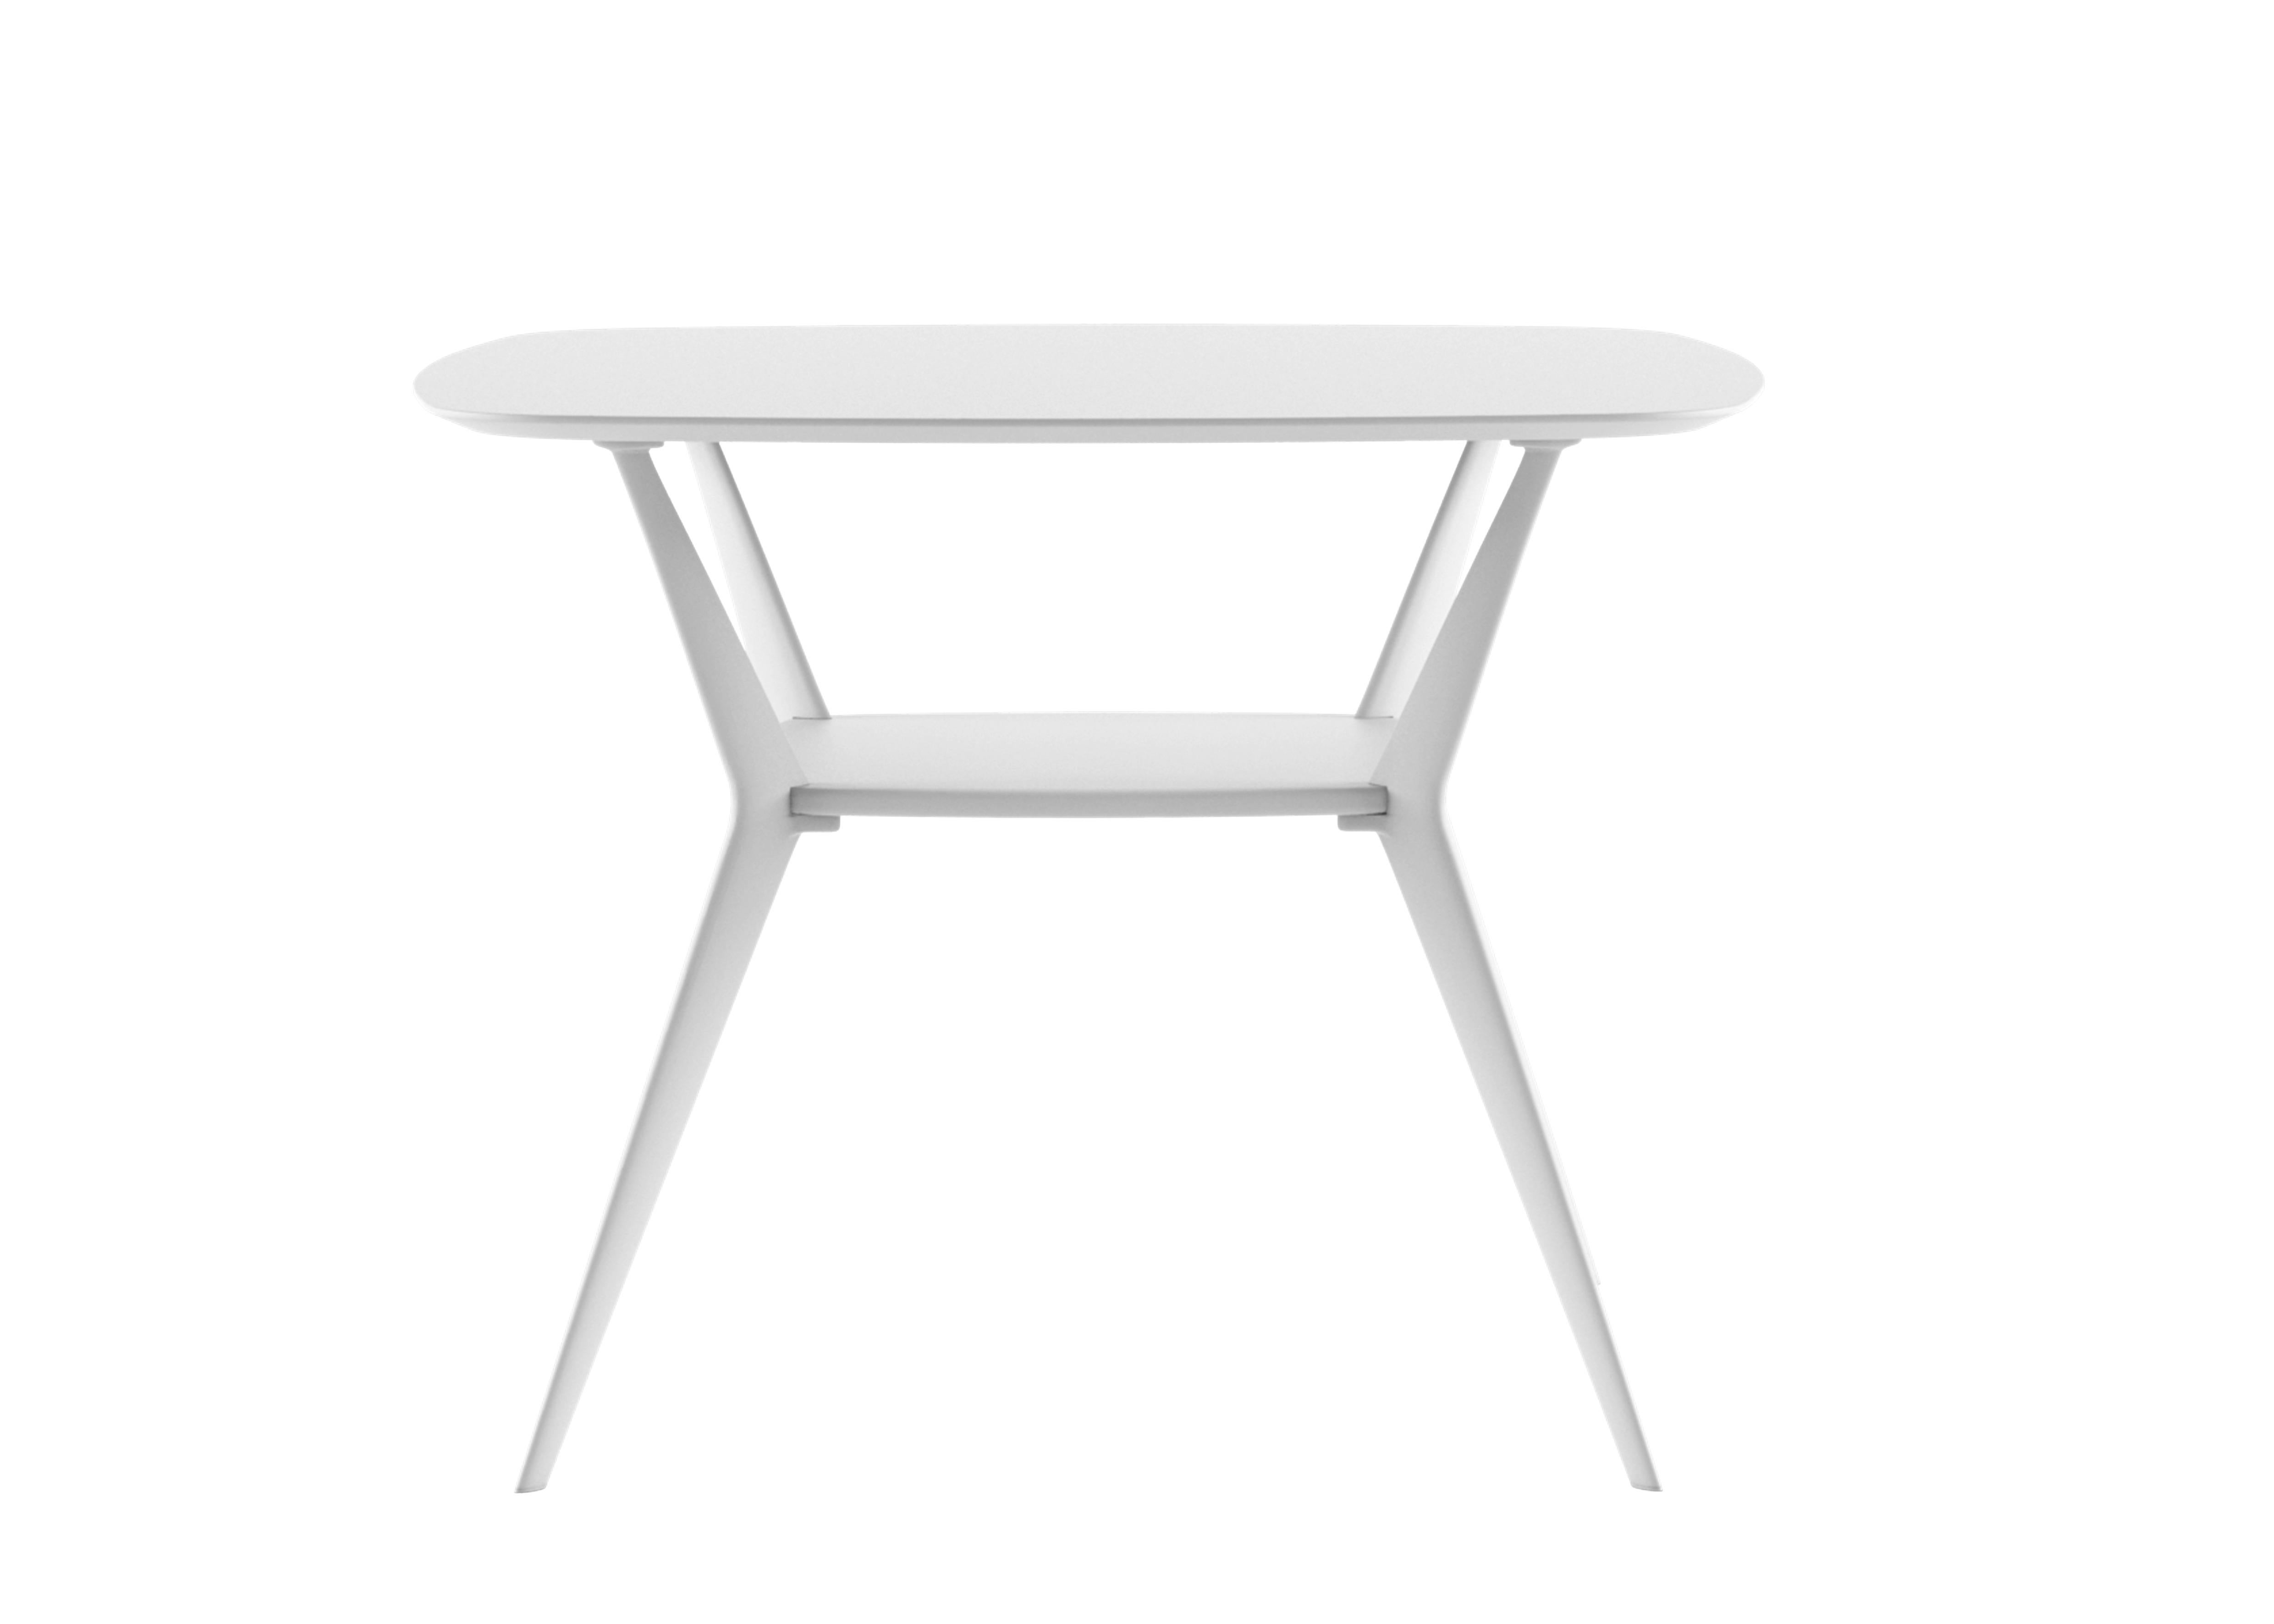 Alias B02 Biplane XS 60x60 Outdoor Table in White Top and Lacquered Frame by Alberto Meda

Little table for outdoor use with structure composed of 4 legs in die-cast aluminium with painted finishes, connected by shelf.Square top in white acrylic